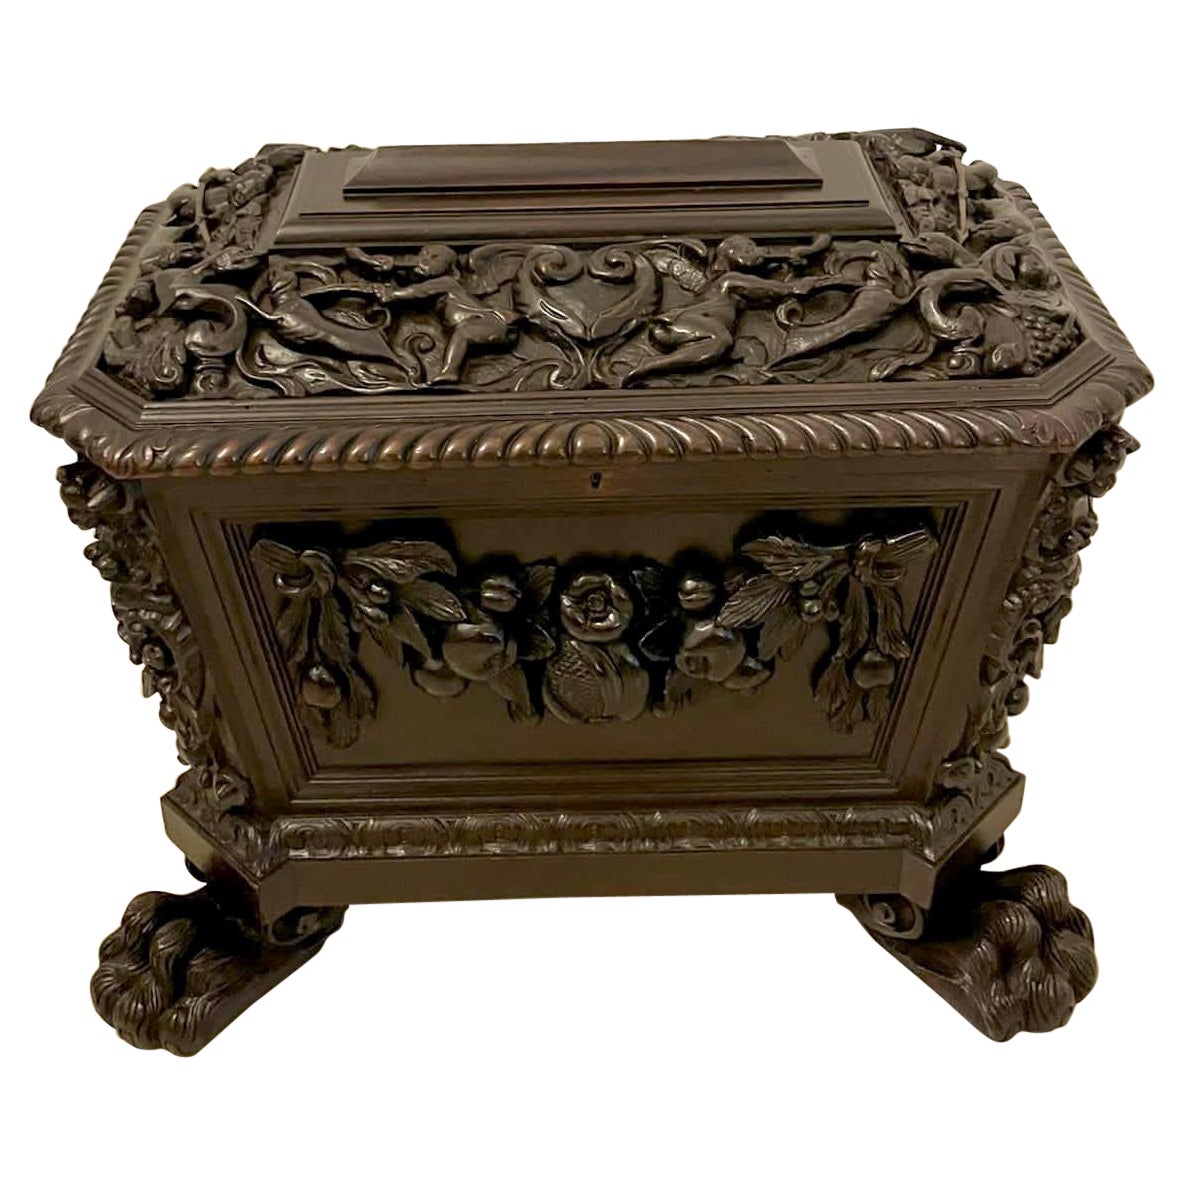 Outstanding Quality Antique Victorian Freestanding Carved Oak Wine Cooler  For Sale